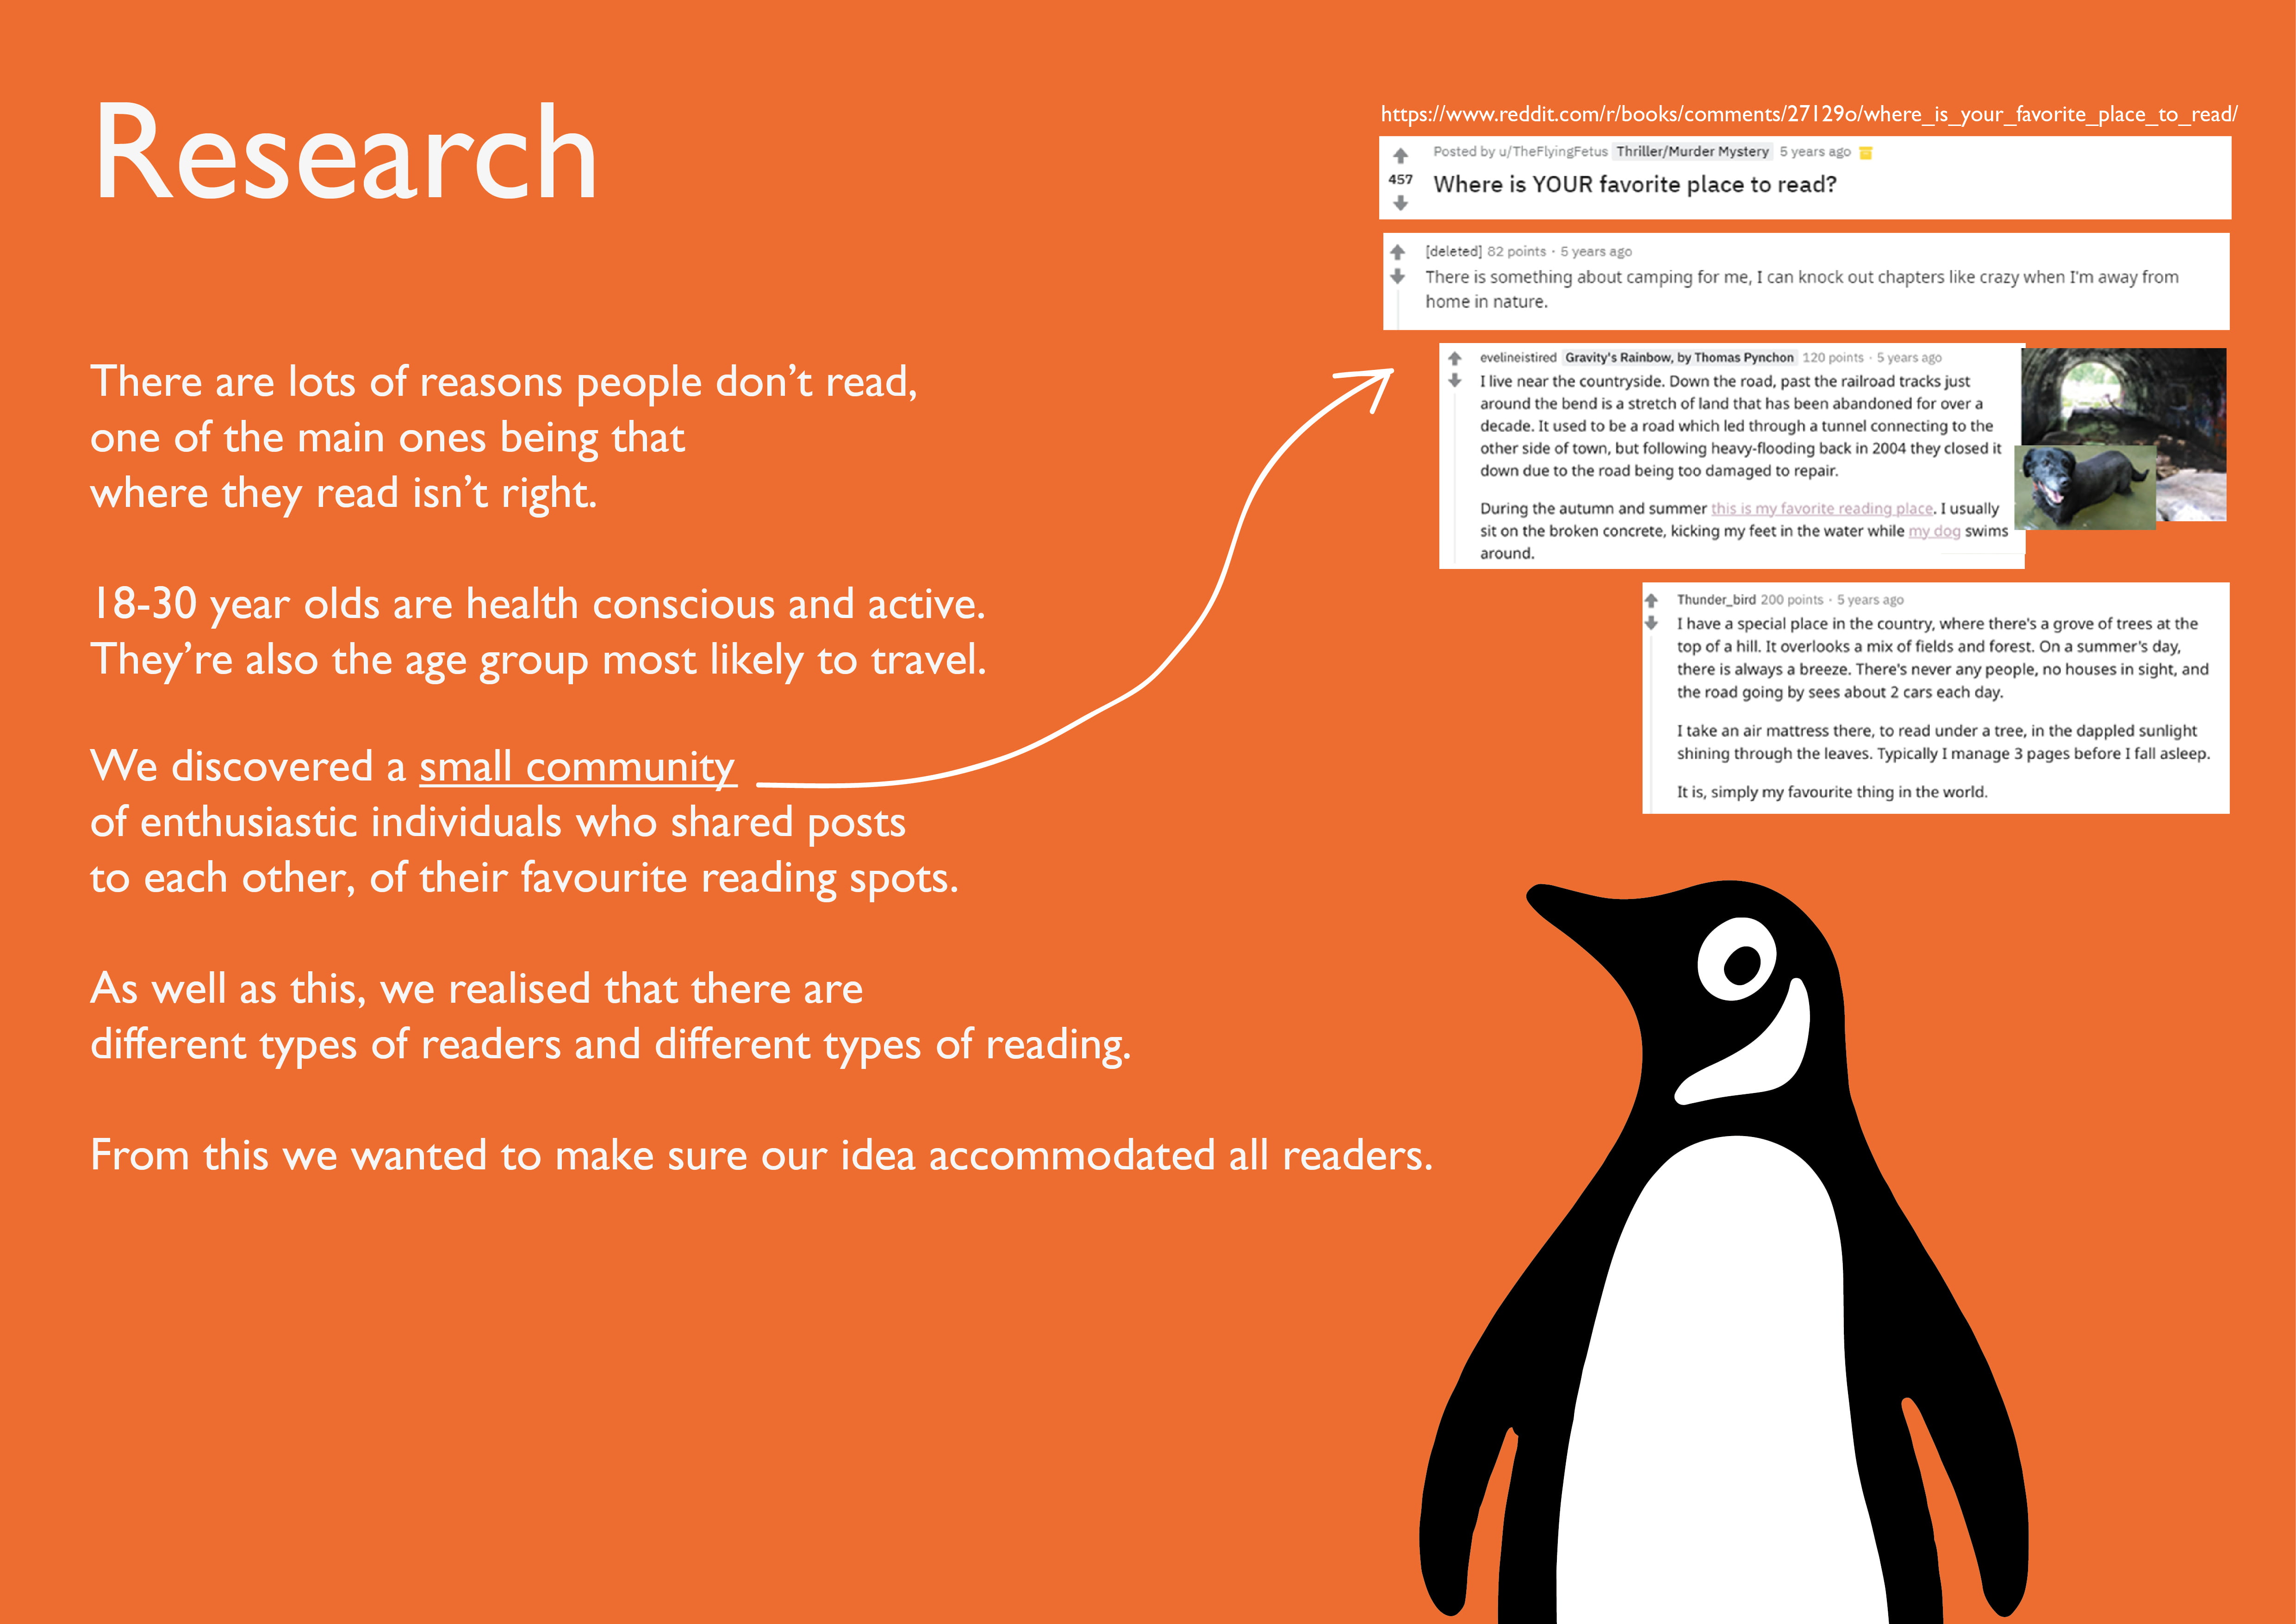 Research poster with concept of idea on orange background with Penguin logo.